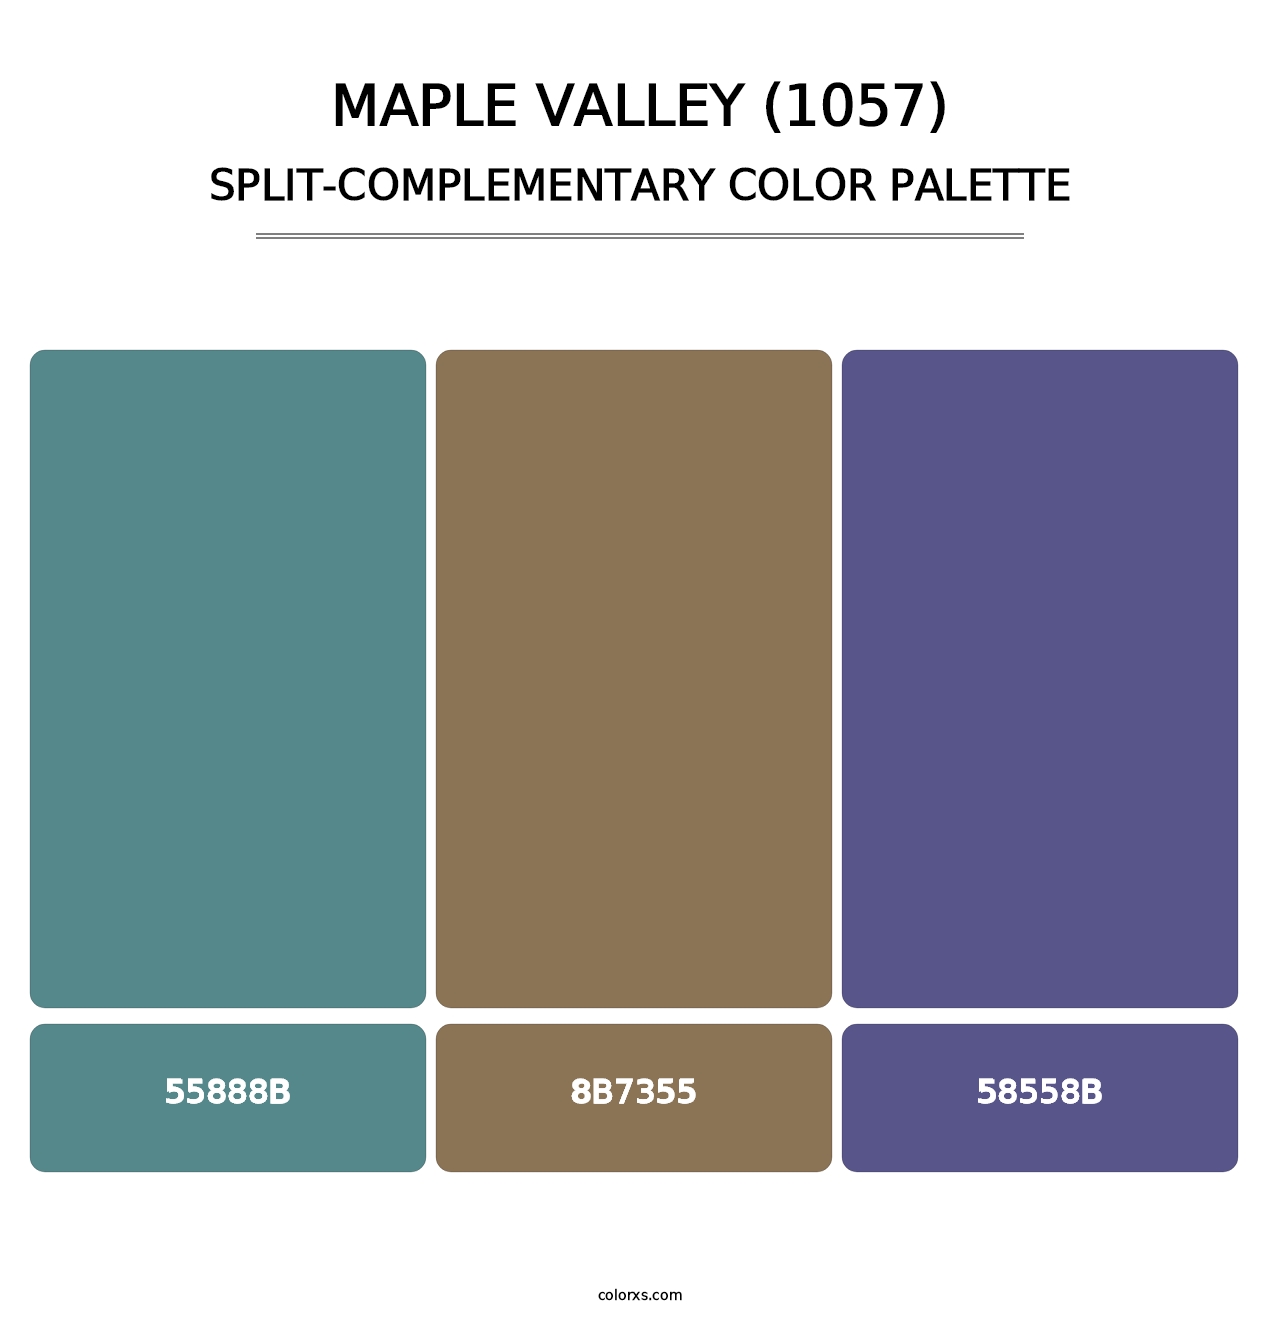 Maple Valley (1057) - Split-Complementary Color Palette